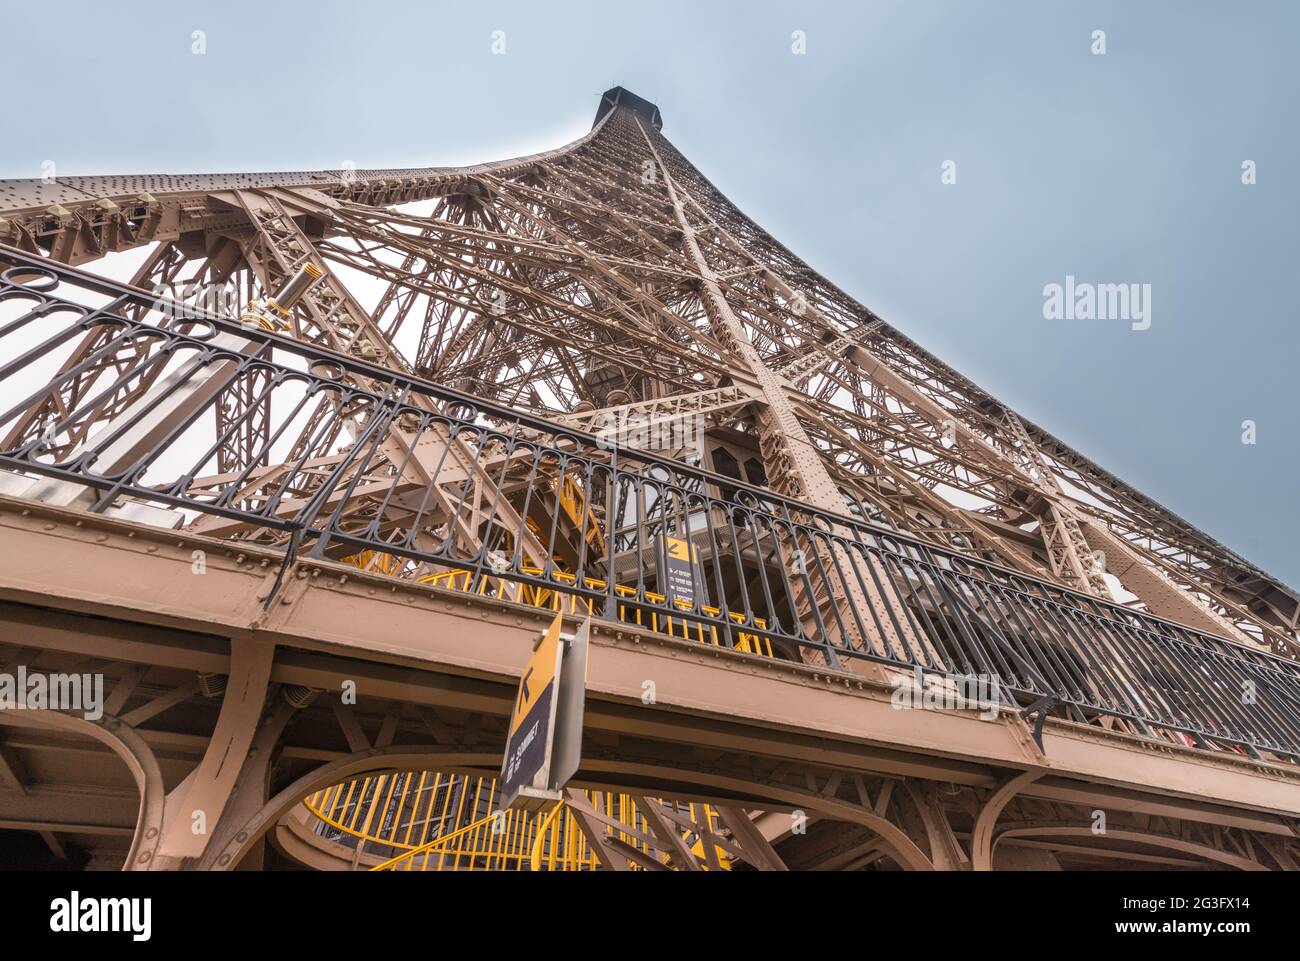 Magnificence of Eiffel Tower, view of powerful landmark structure, Paris Stock Photo